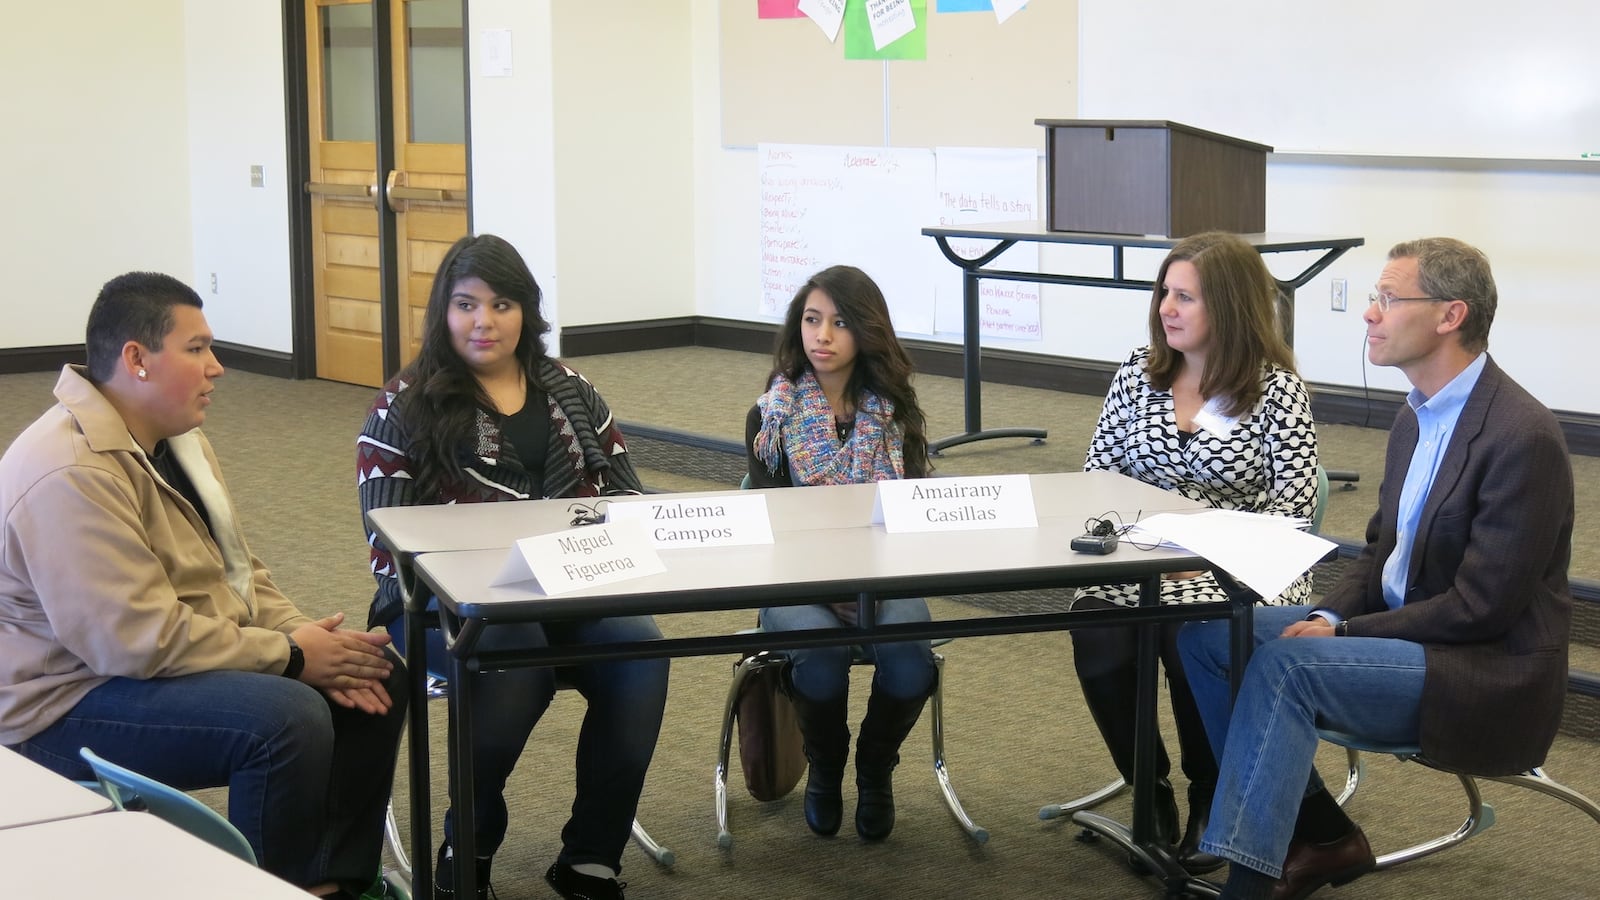 Denver schools superintendent Tom Boasberg and North High School Principal Nicole Veltze meet with three seniors—from left, Miguel Figueroa, Zulema Campos, and Amairany Casillas—to talk about graduating high school.